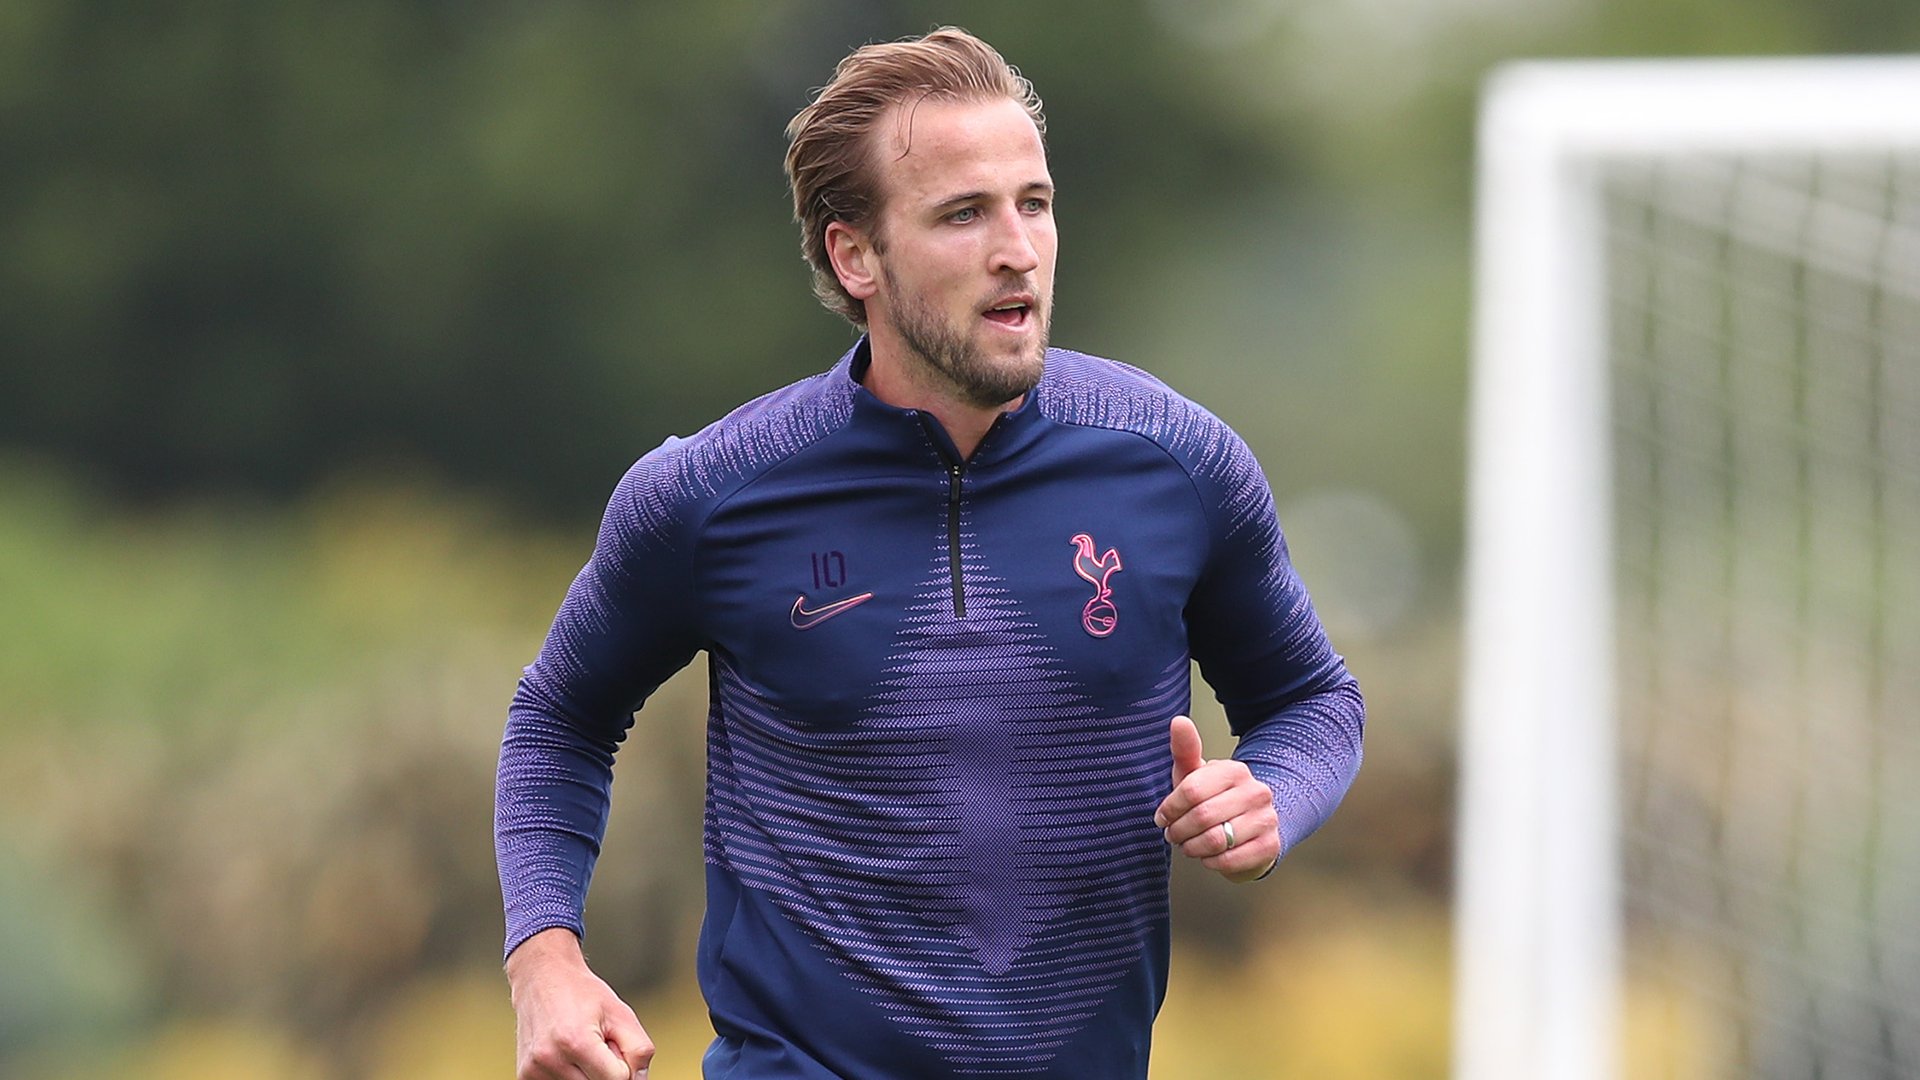 Harry Kane is the undisputed first-choice striker at Tottenham